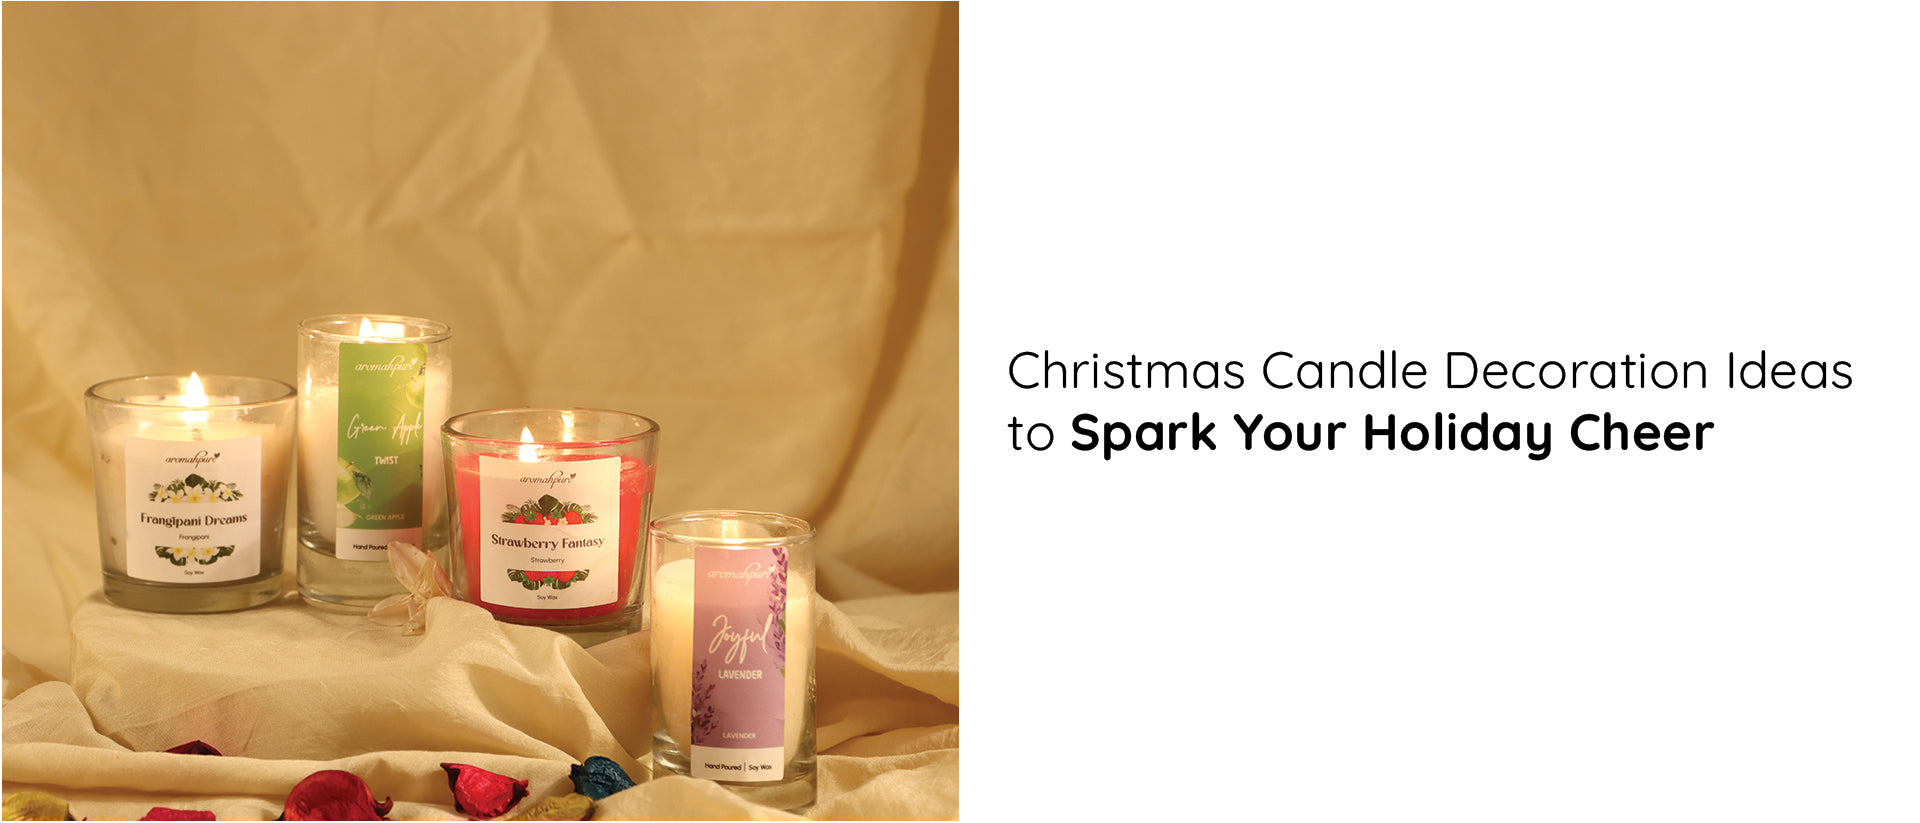 Christmas Candle Decoration Ideas to Spark Your Holiday Cheer